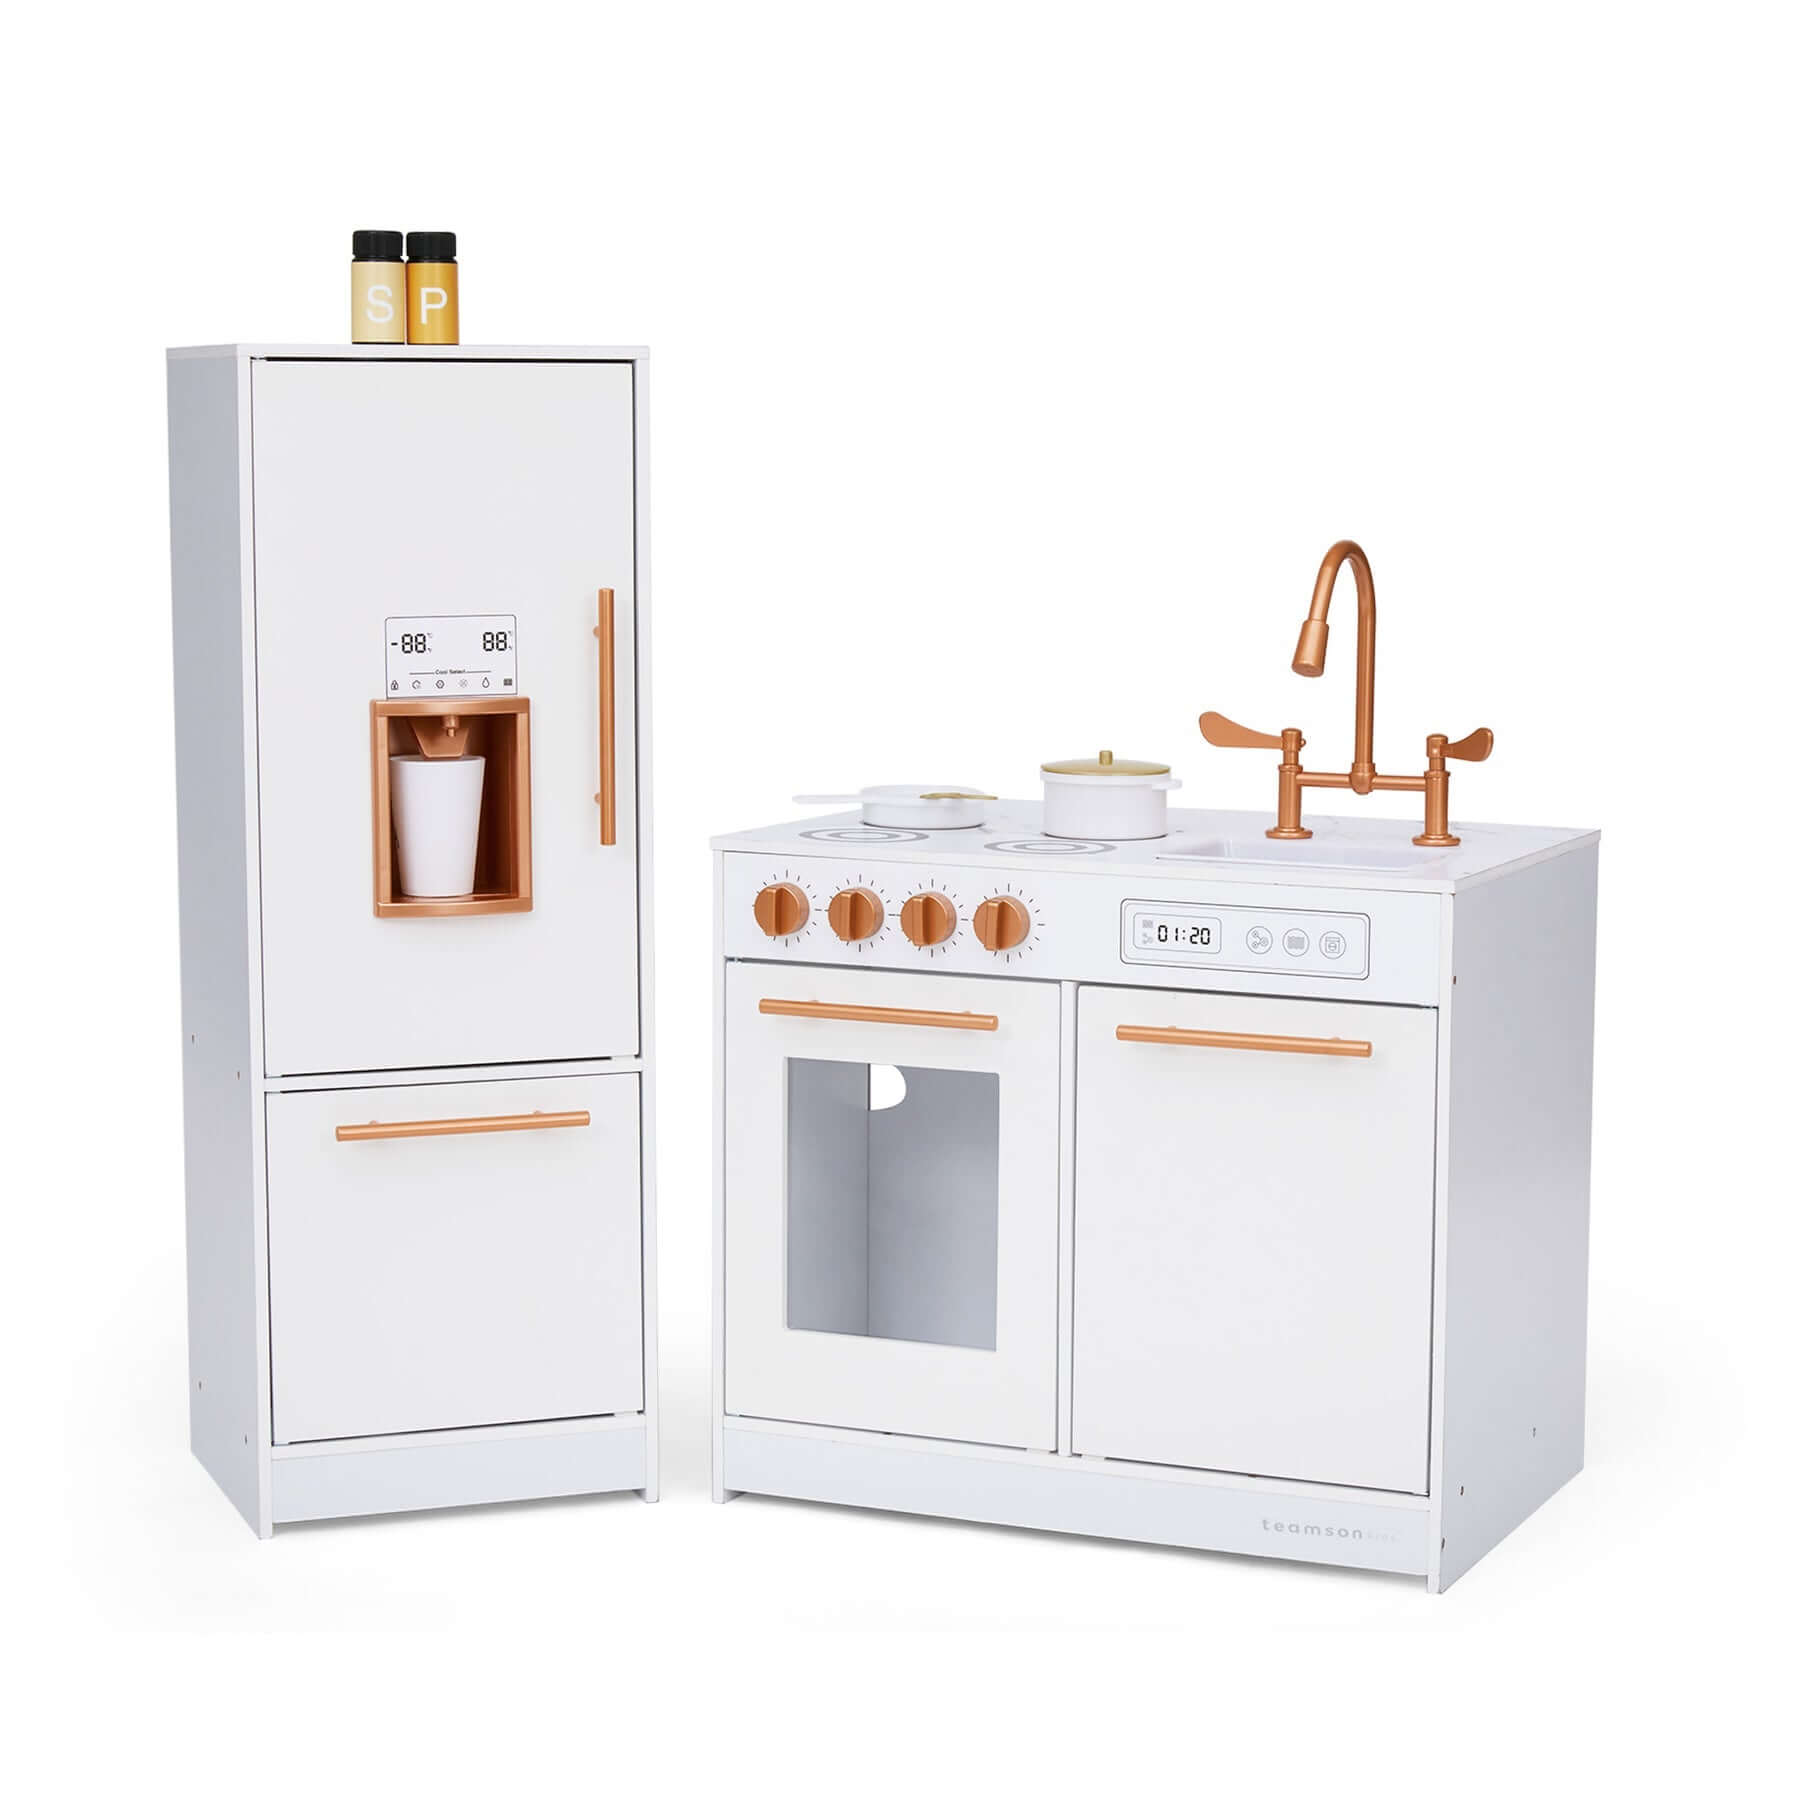 Teamson Kids Little Chef Milano Two-Piece Modular Modern Delight Play Kitchen TD-13811A angled view white background